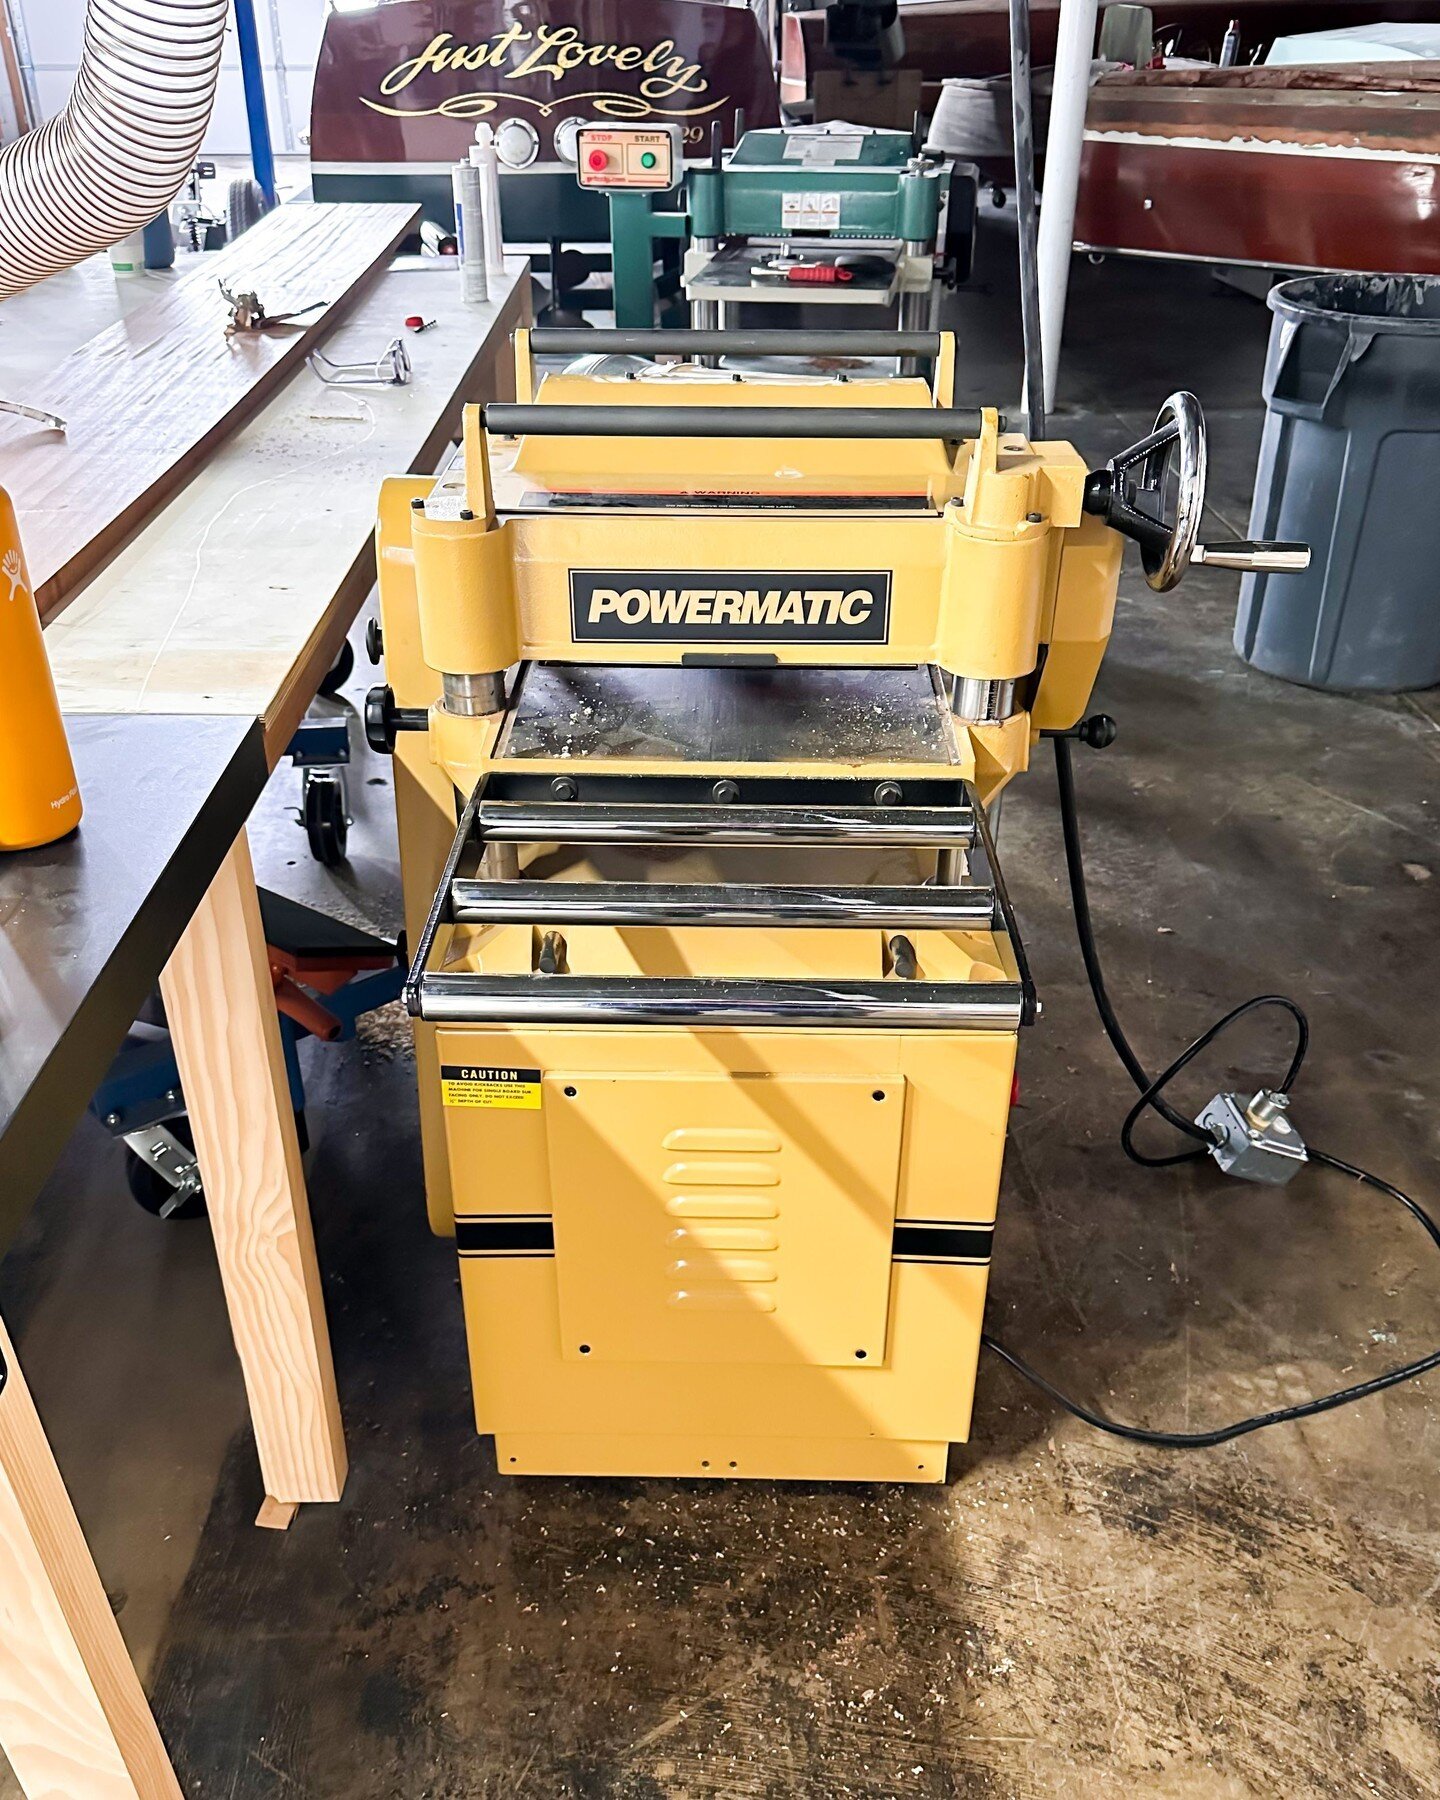 Adding some @powermatic.woodworking gold to the family. Quite the upgrade from the vicegrip-adjusted, fuse-tripping, wheels-falling-off Craigslist find that was there before.

#woodshop #workshop #woodwork #woodworking #powertools #powermatic #planer